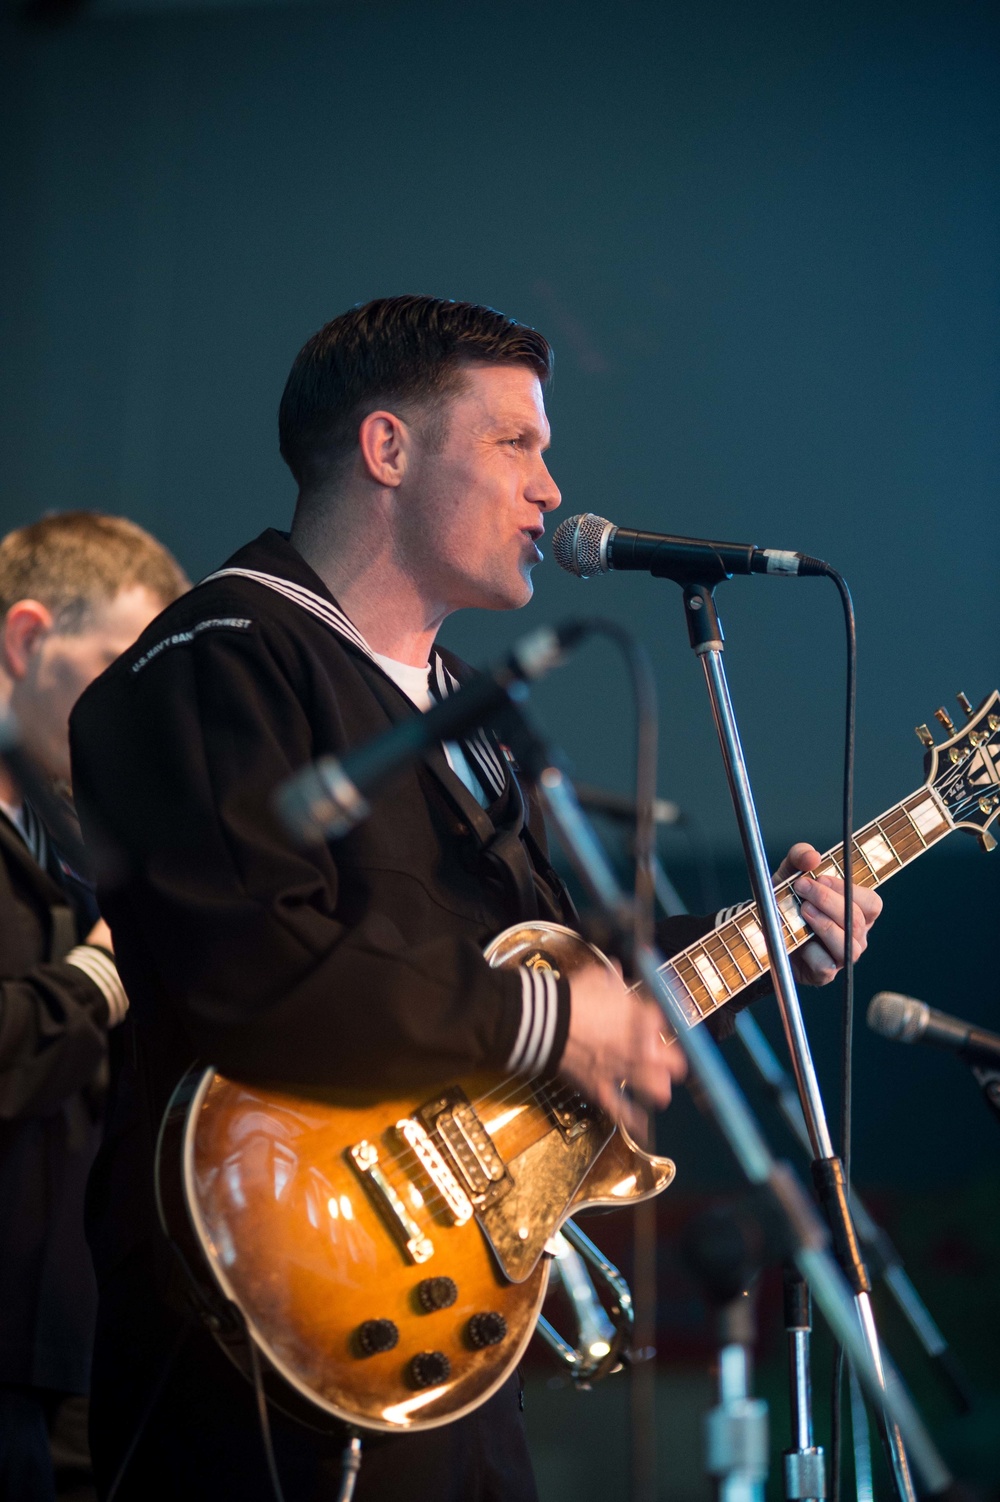 Navy Band Northwest performs at Redwood Coast Music Festival